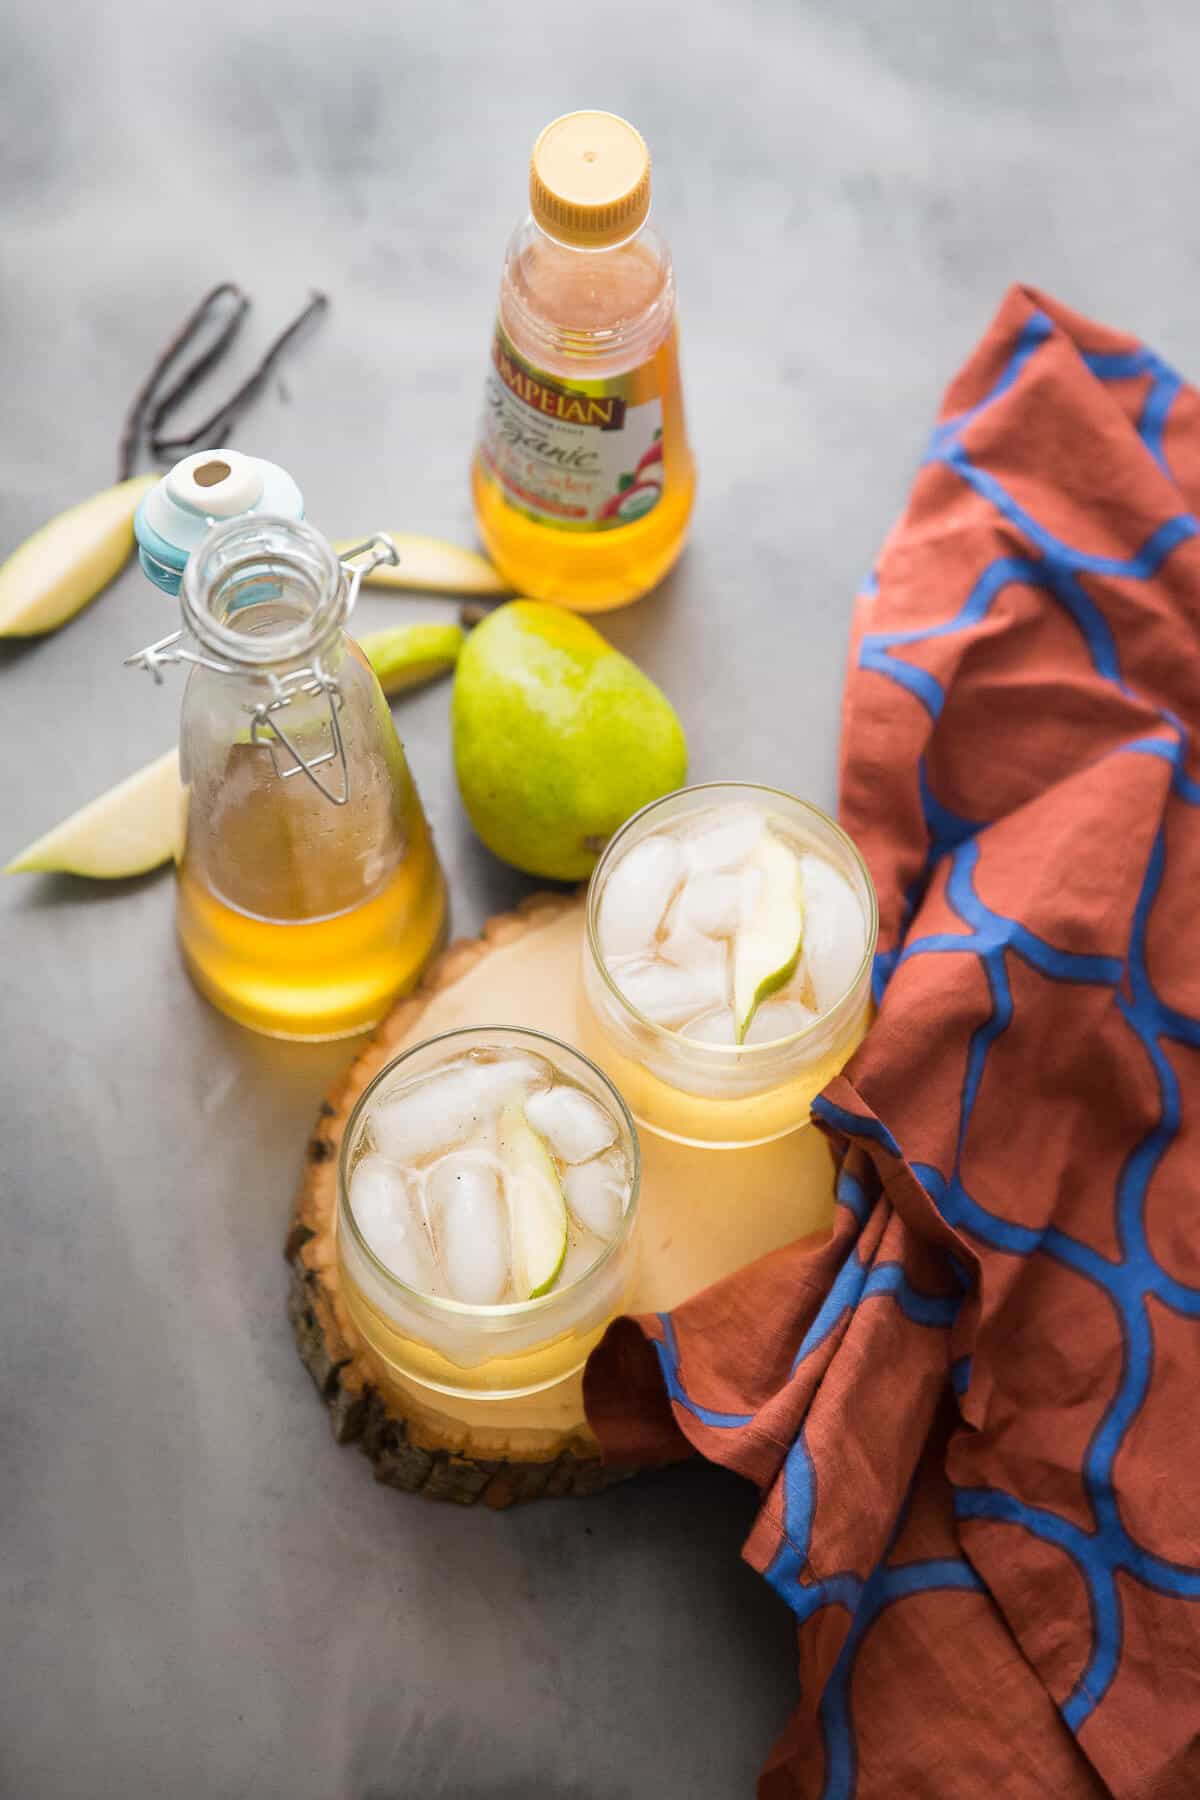 This fruit shrub recipe is crisp, sweet and refreshing. You don't often think of cider vinegar as a beverage ingredient, but it really enhances the flavor of fruity drinks. Plus shrub is just fun to say!